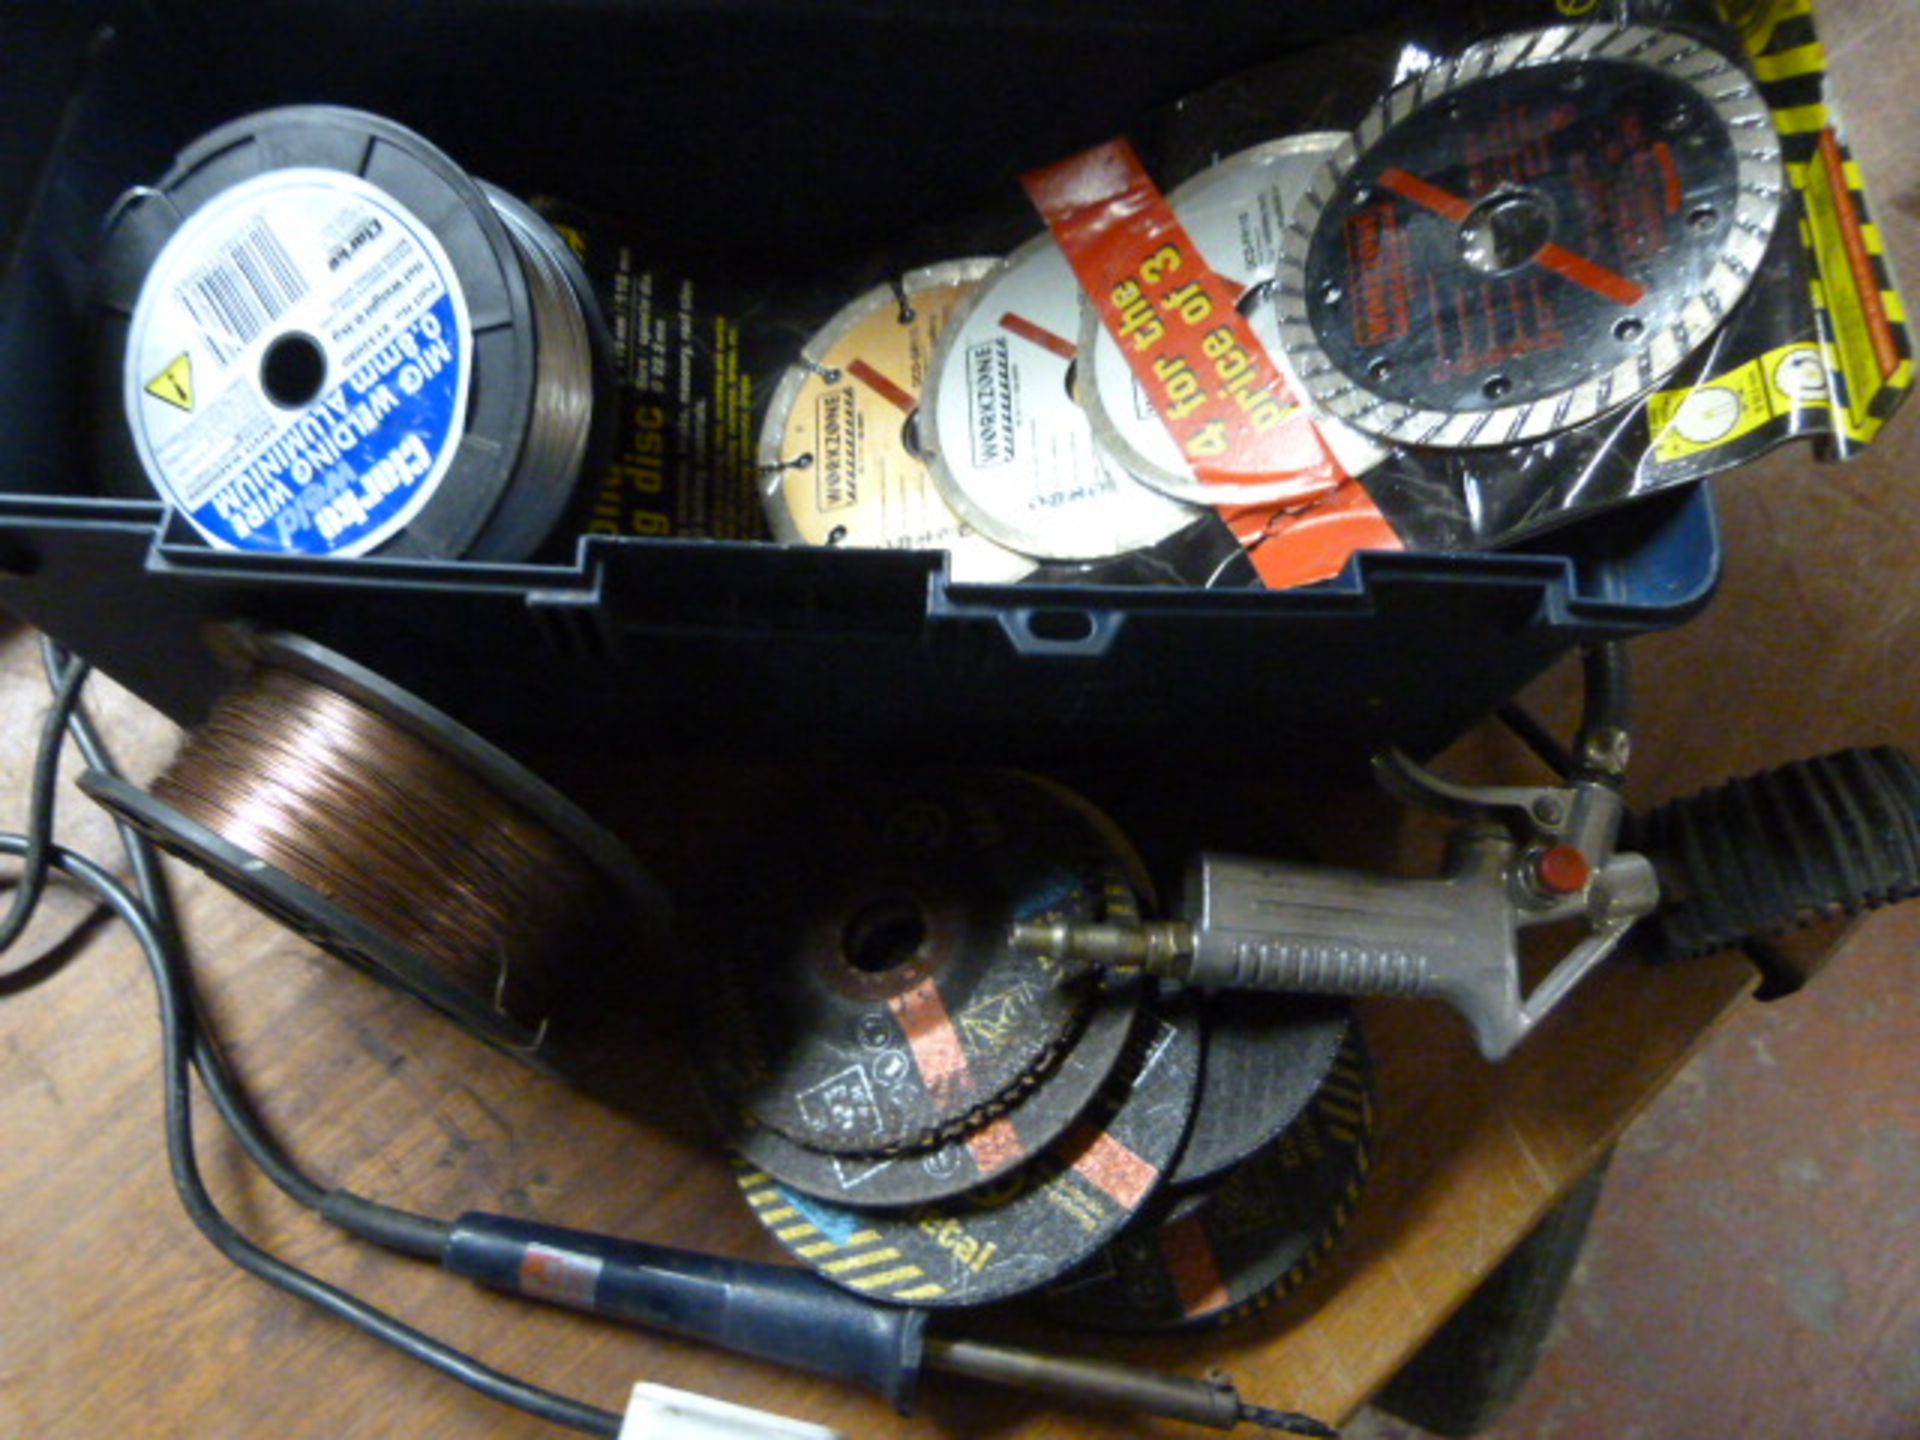 Toolbox Containing Pneumatic Tool, Soldering Iron